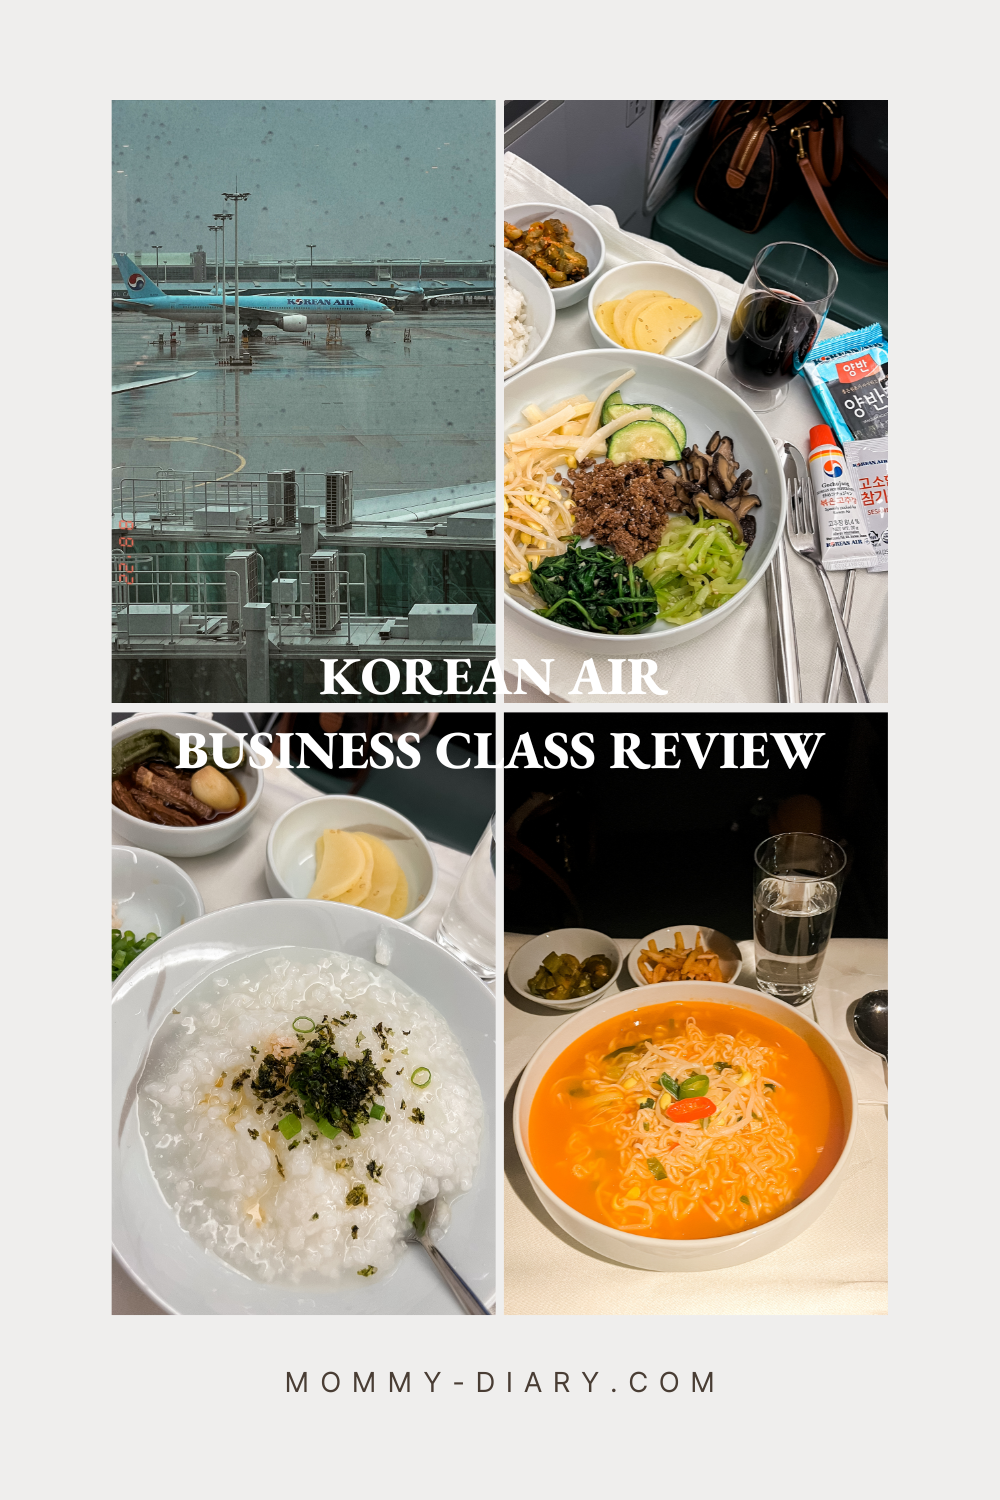 Korean Airline Business Class Review